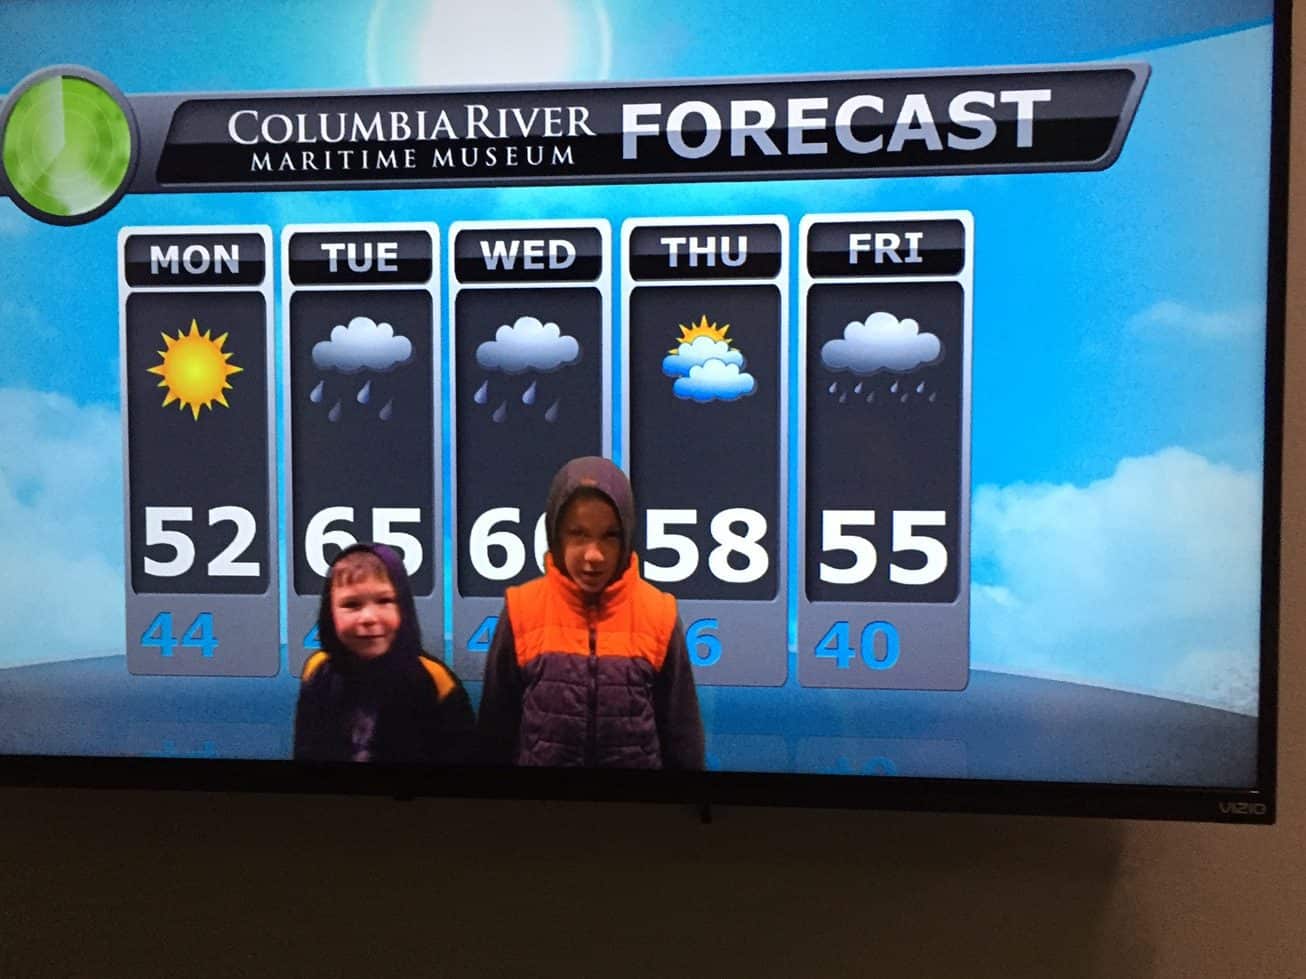 Kids pretending to be meteorologists in the weather forecast exhibit at the Columbia River Maritime Museum in Astoria, Oregon.